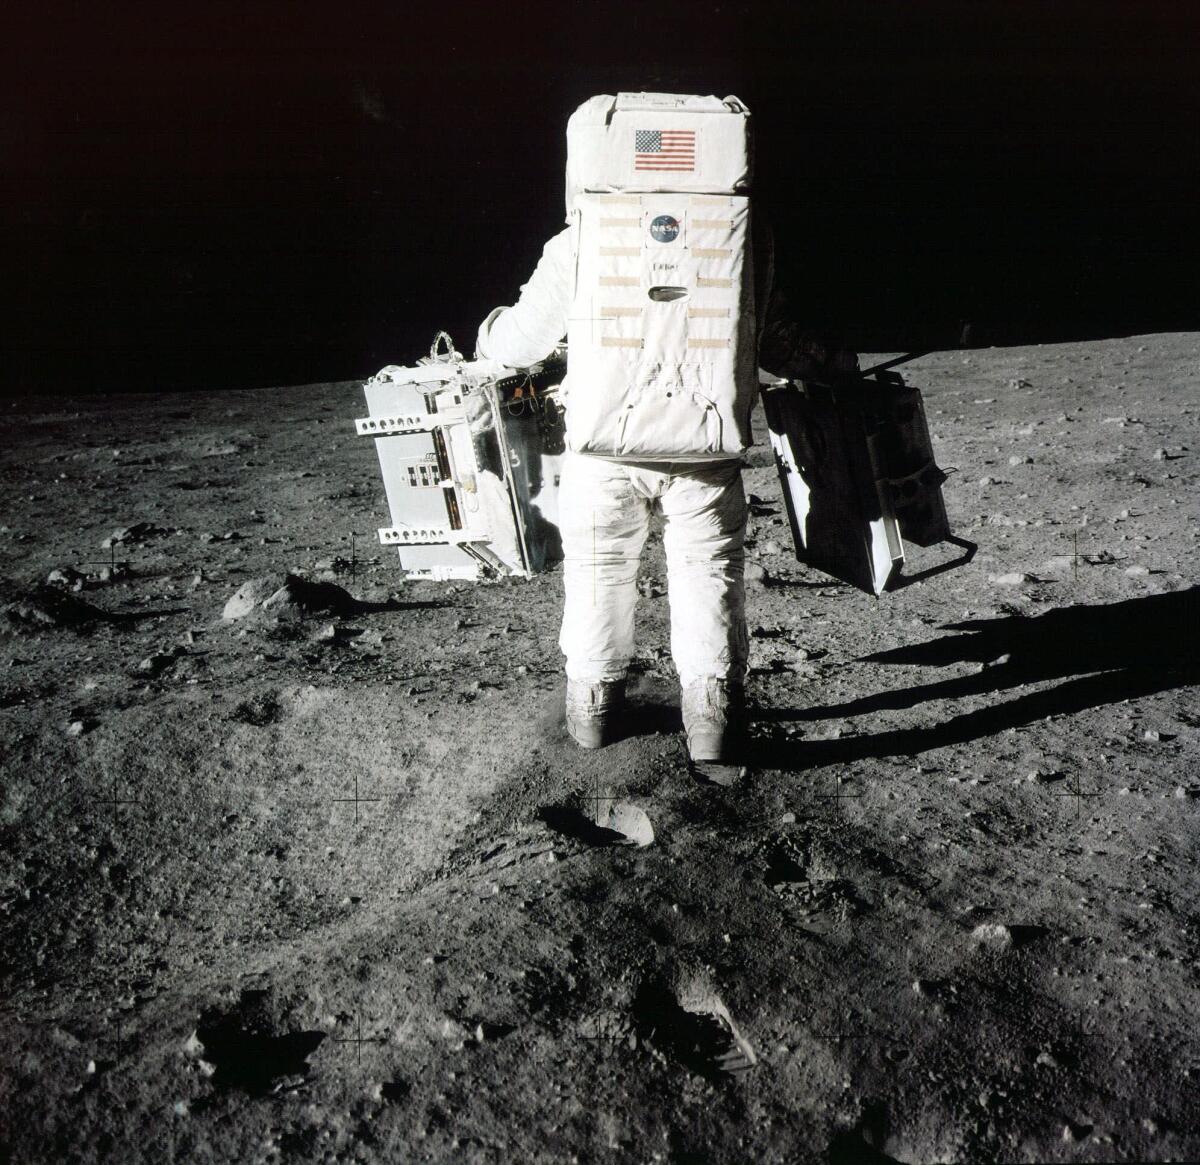 Buzz Aldrin carries scientific experiments on the moon. The picture was taken by Neil Armstrong.